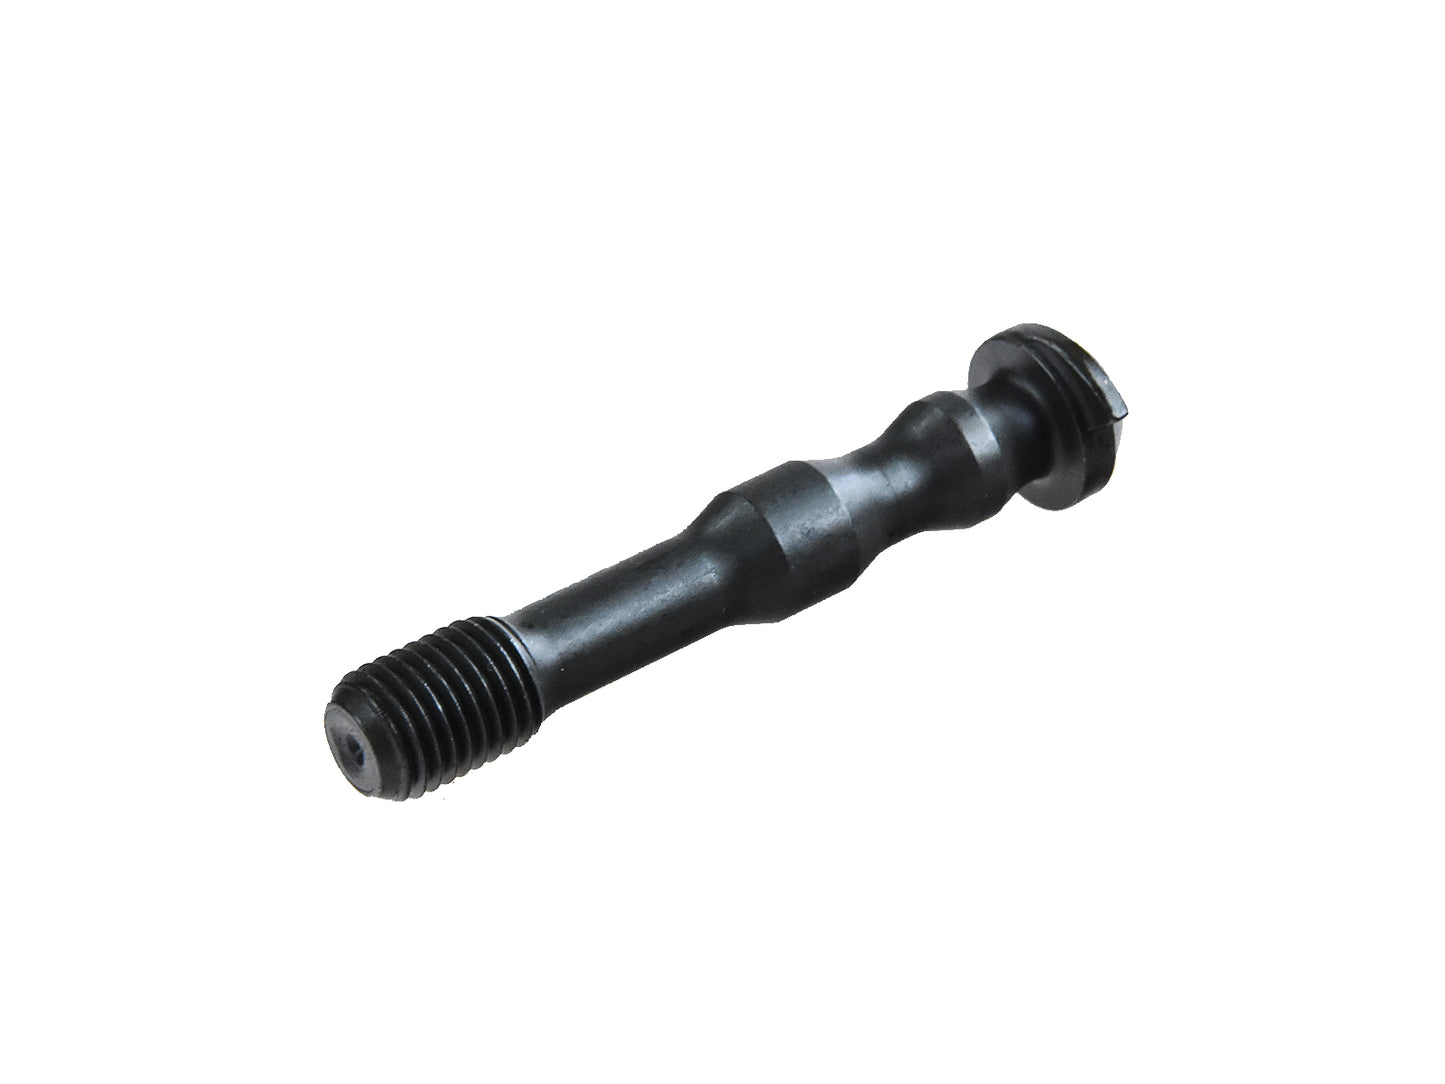 Connecting rod screw for Porsche 911 F 2.0 1.6 912 914-6 connecting rod